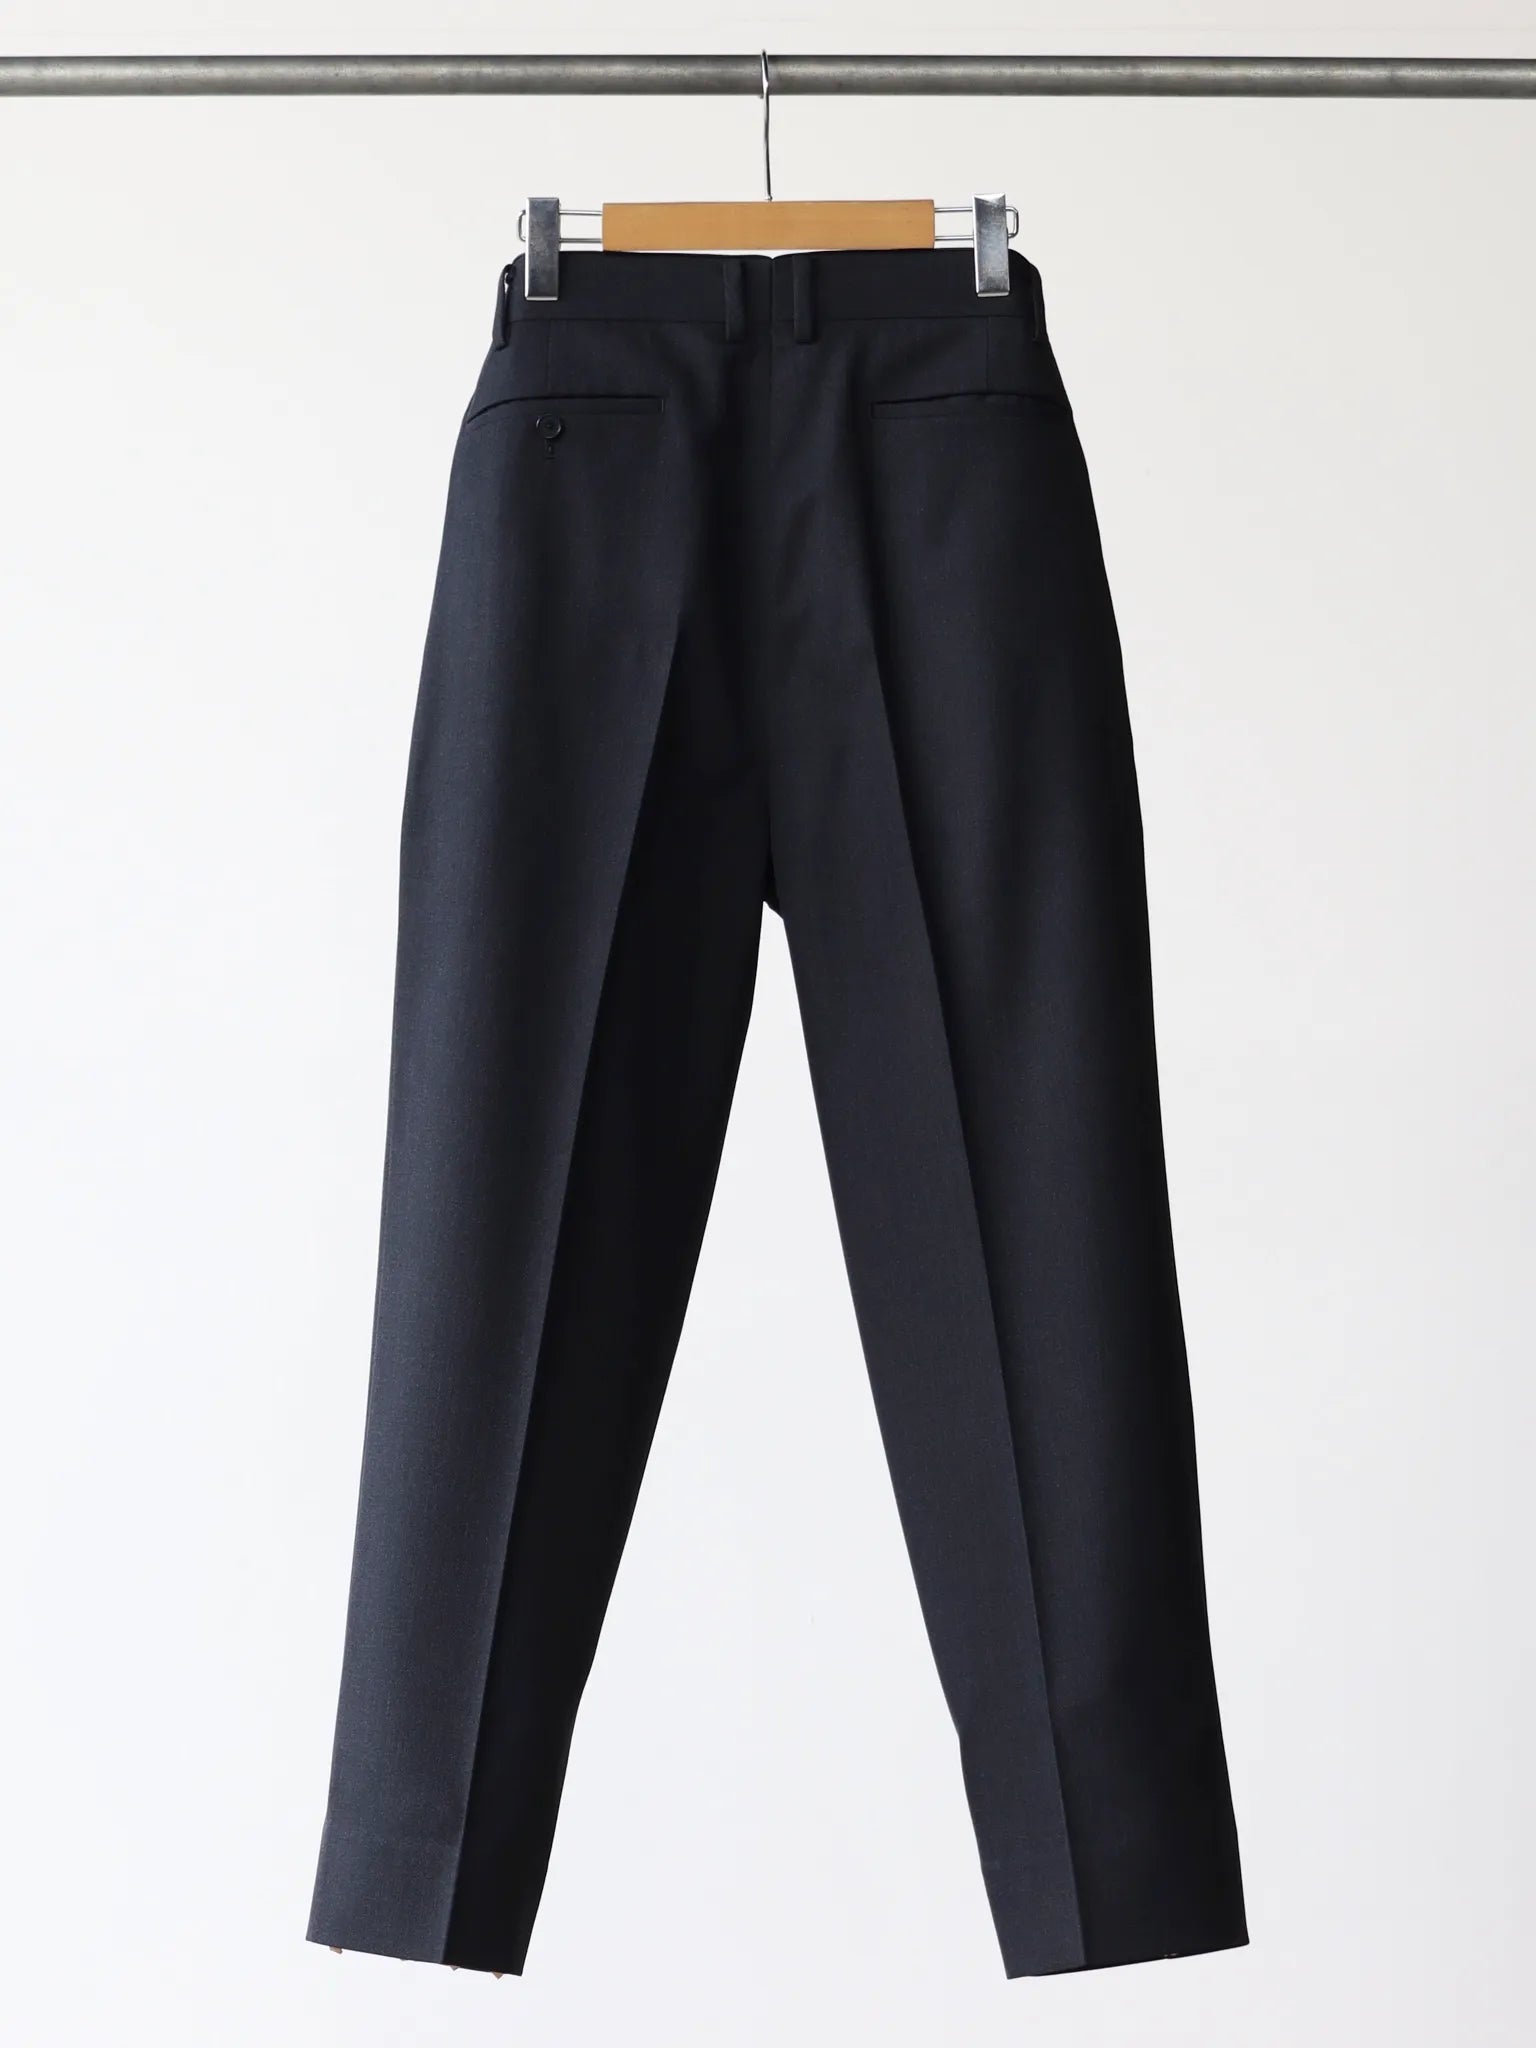 a-presse-covert-cloth-trousers-charcoal-4